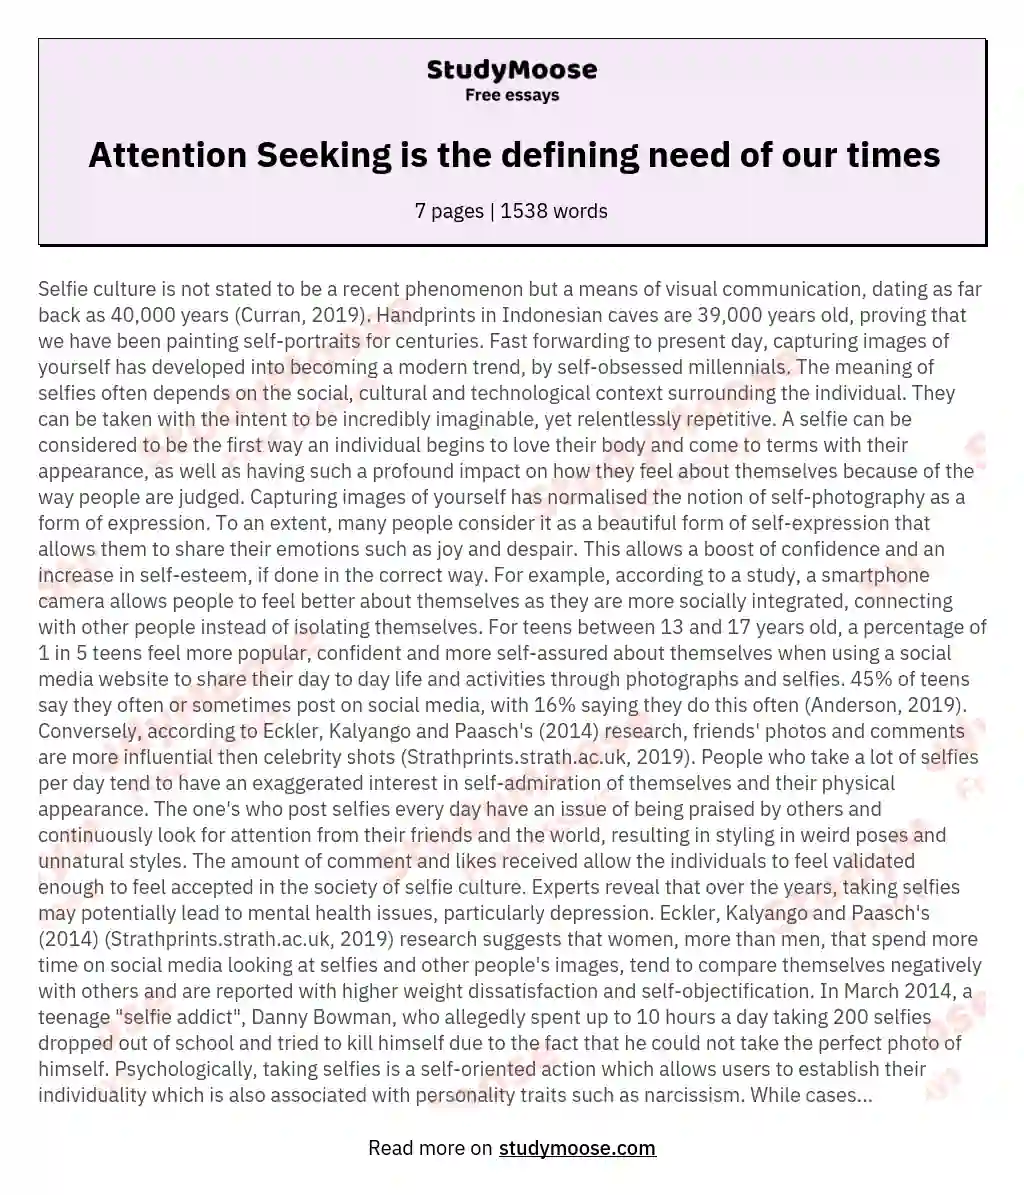 Attention Seeking is the defining need of our times essay